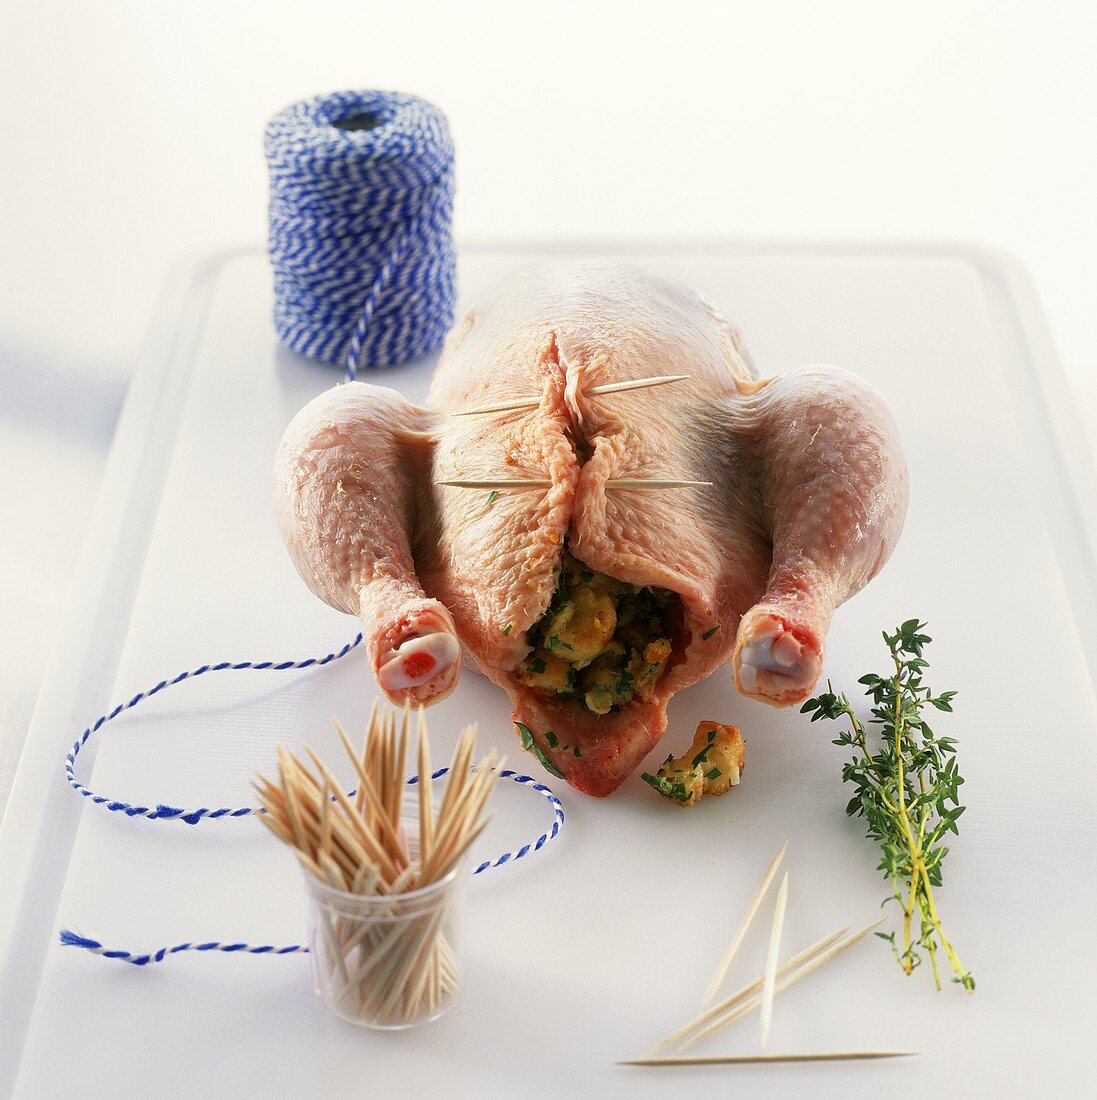 Stuffing chicken and securing with wooden cocktail sticks